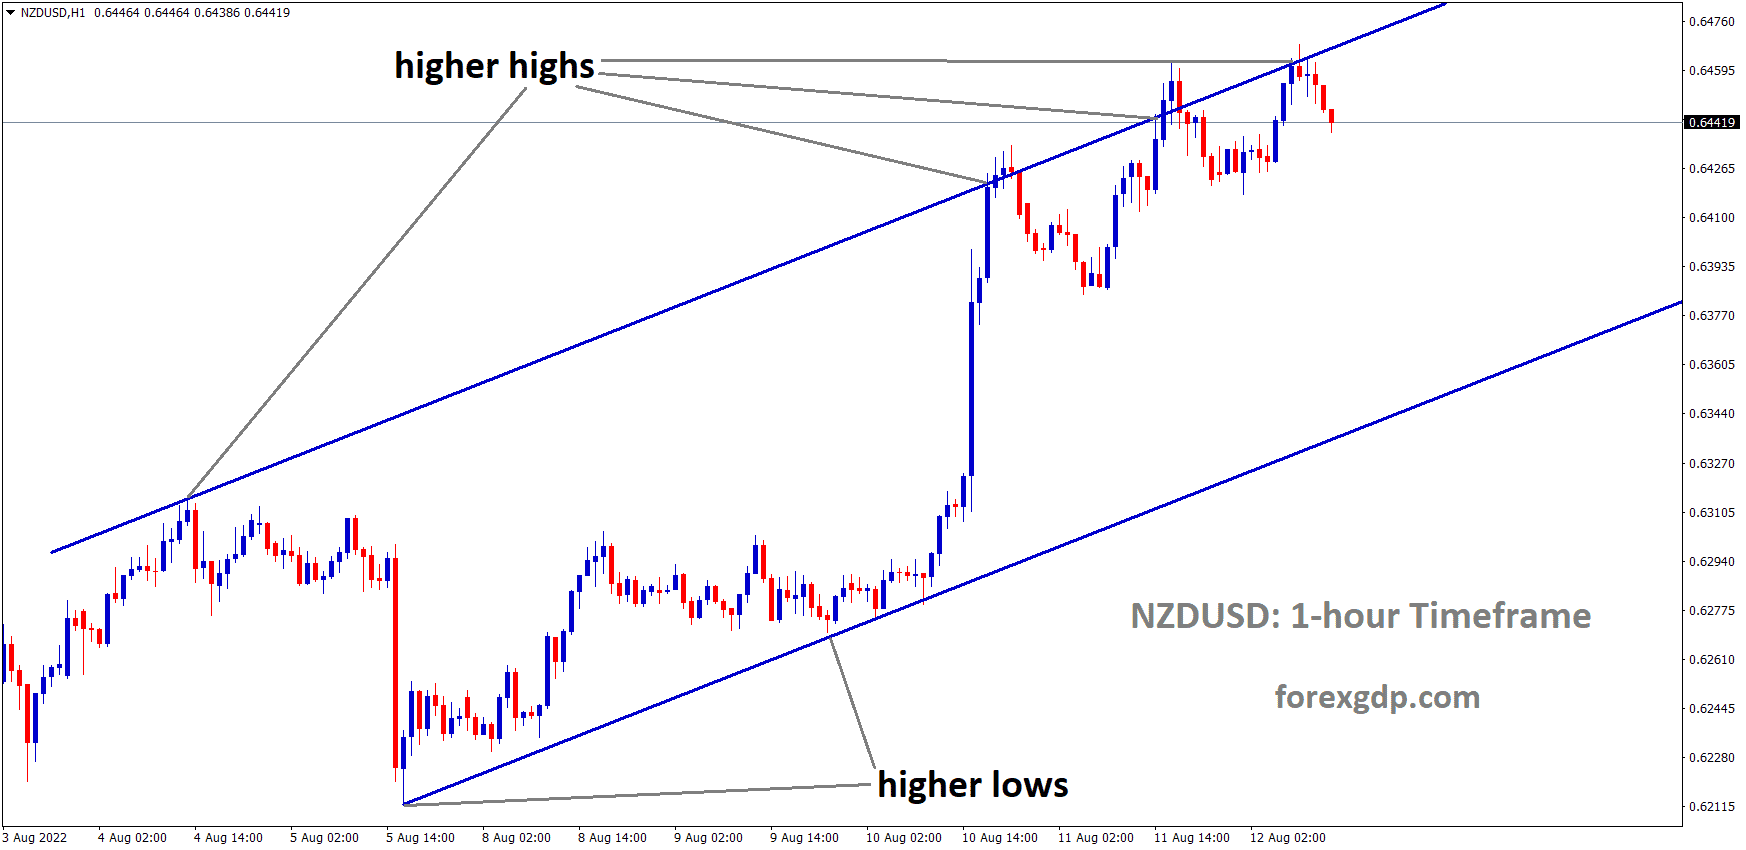 NZDUSD is moving in an Ascending channel and the Market has fallen from the higher high area of the channel